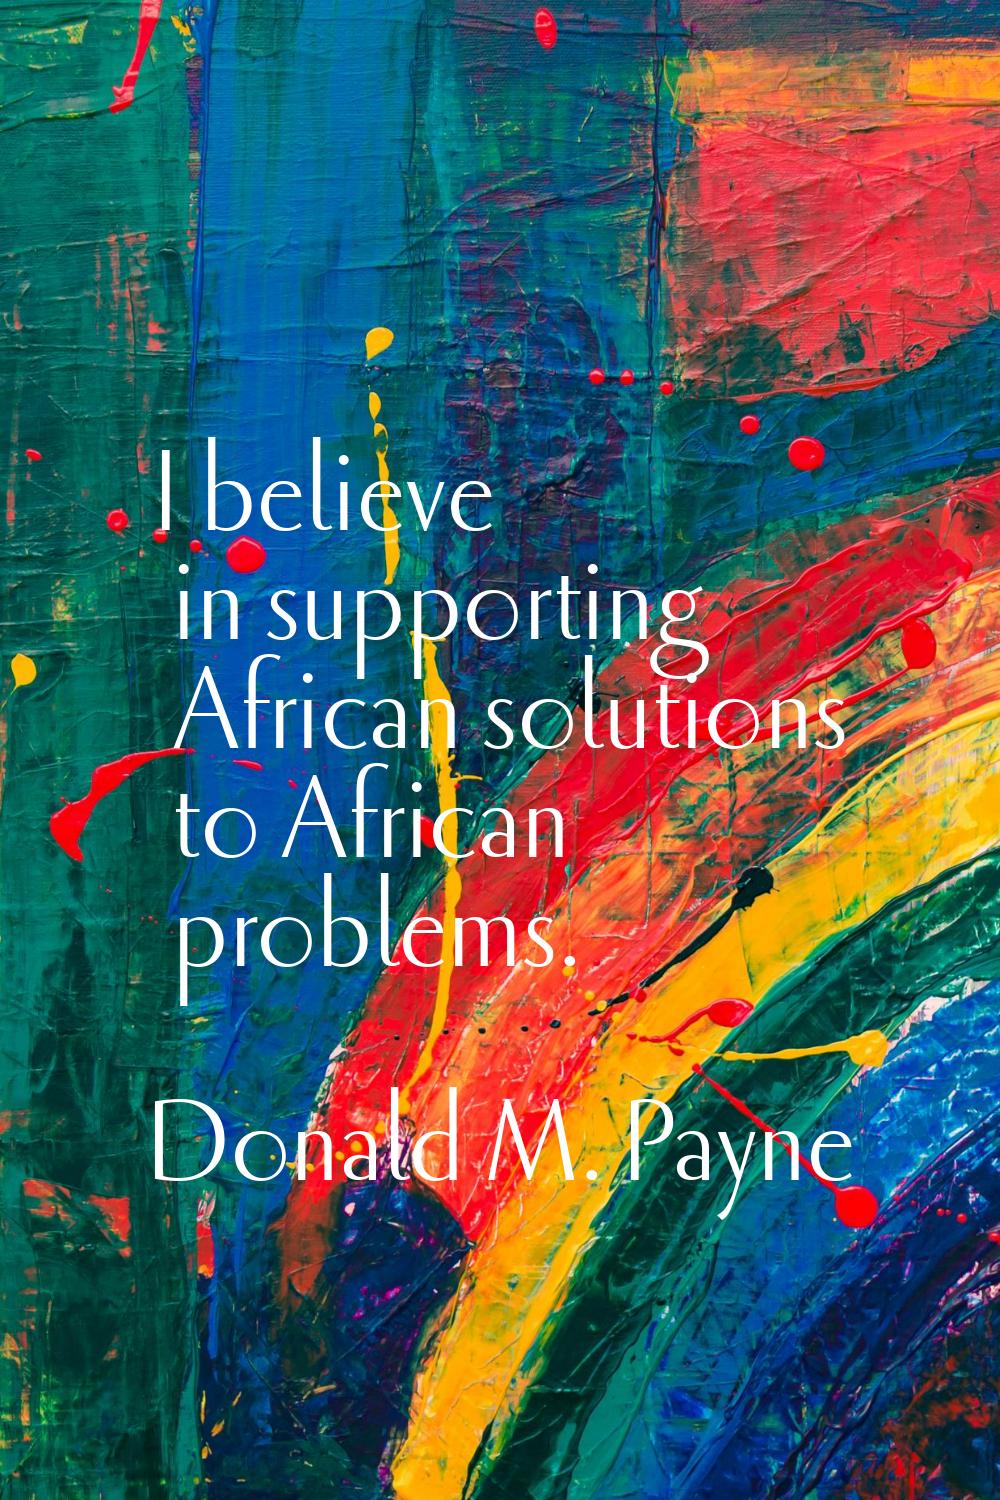 I believe in supporting African solutions to African problems.